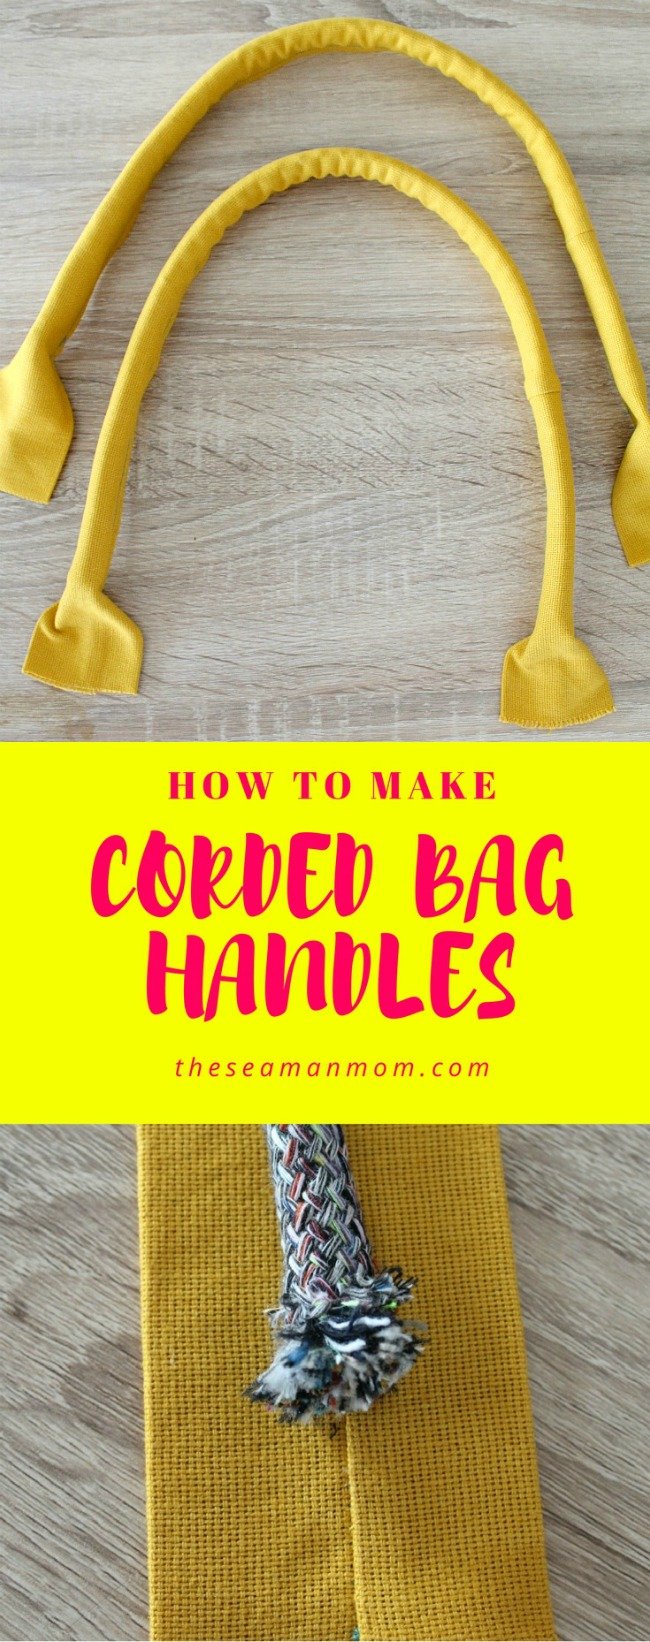 How to make corded handles